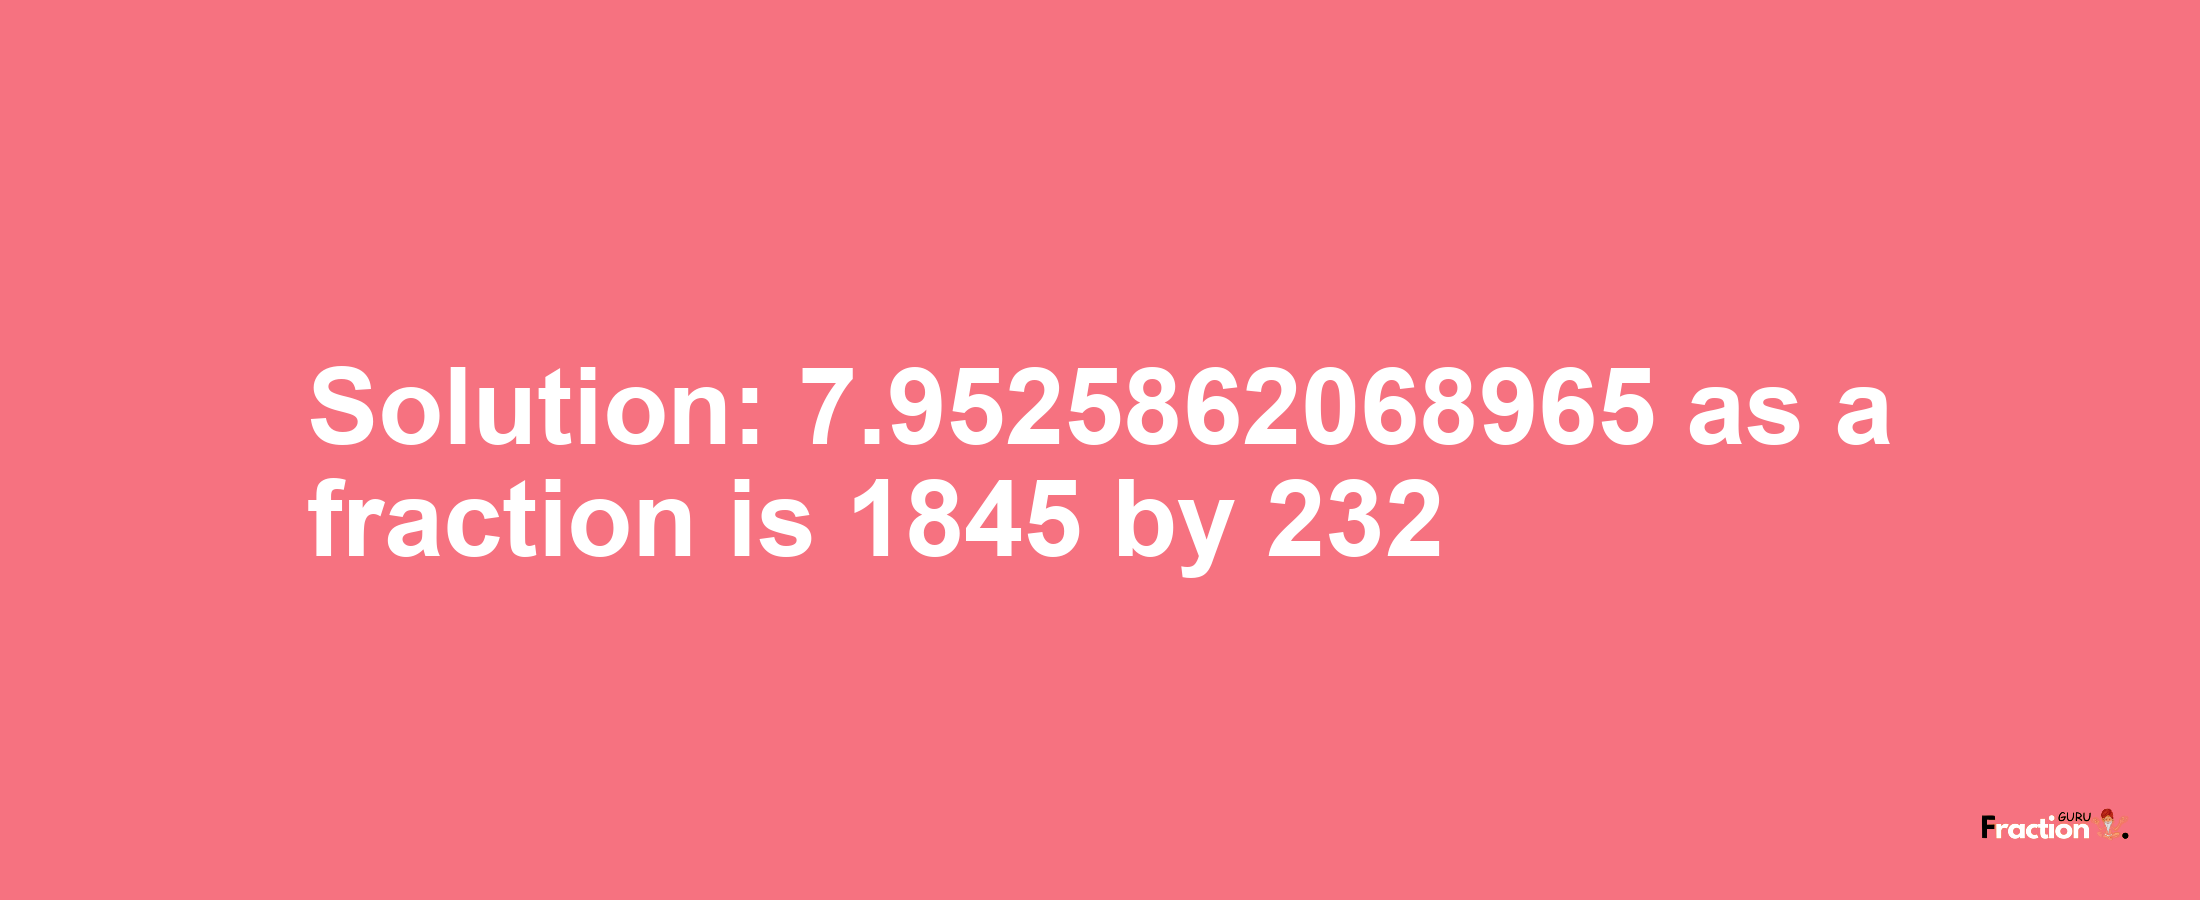 Solution:7.9525862068965 as a fraction is 1845/232